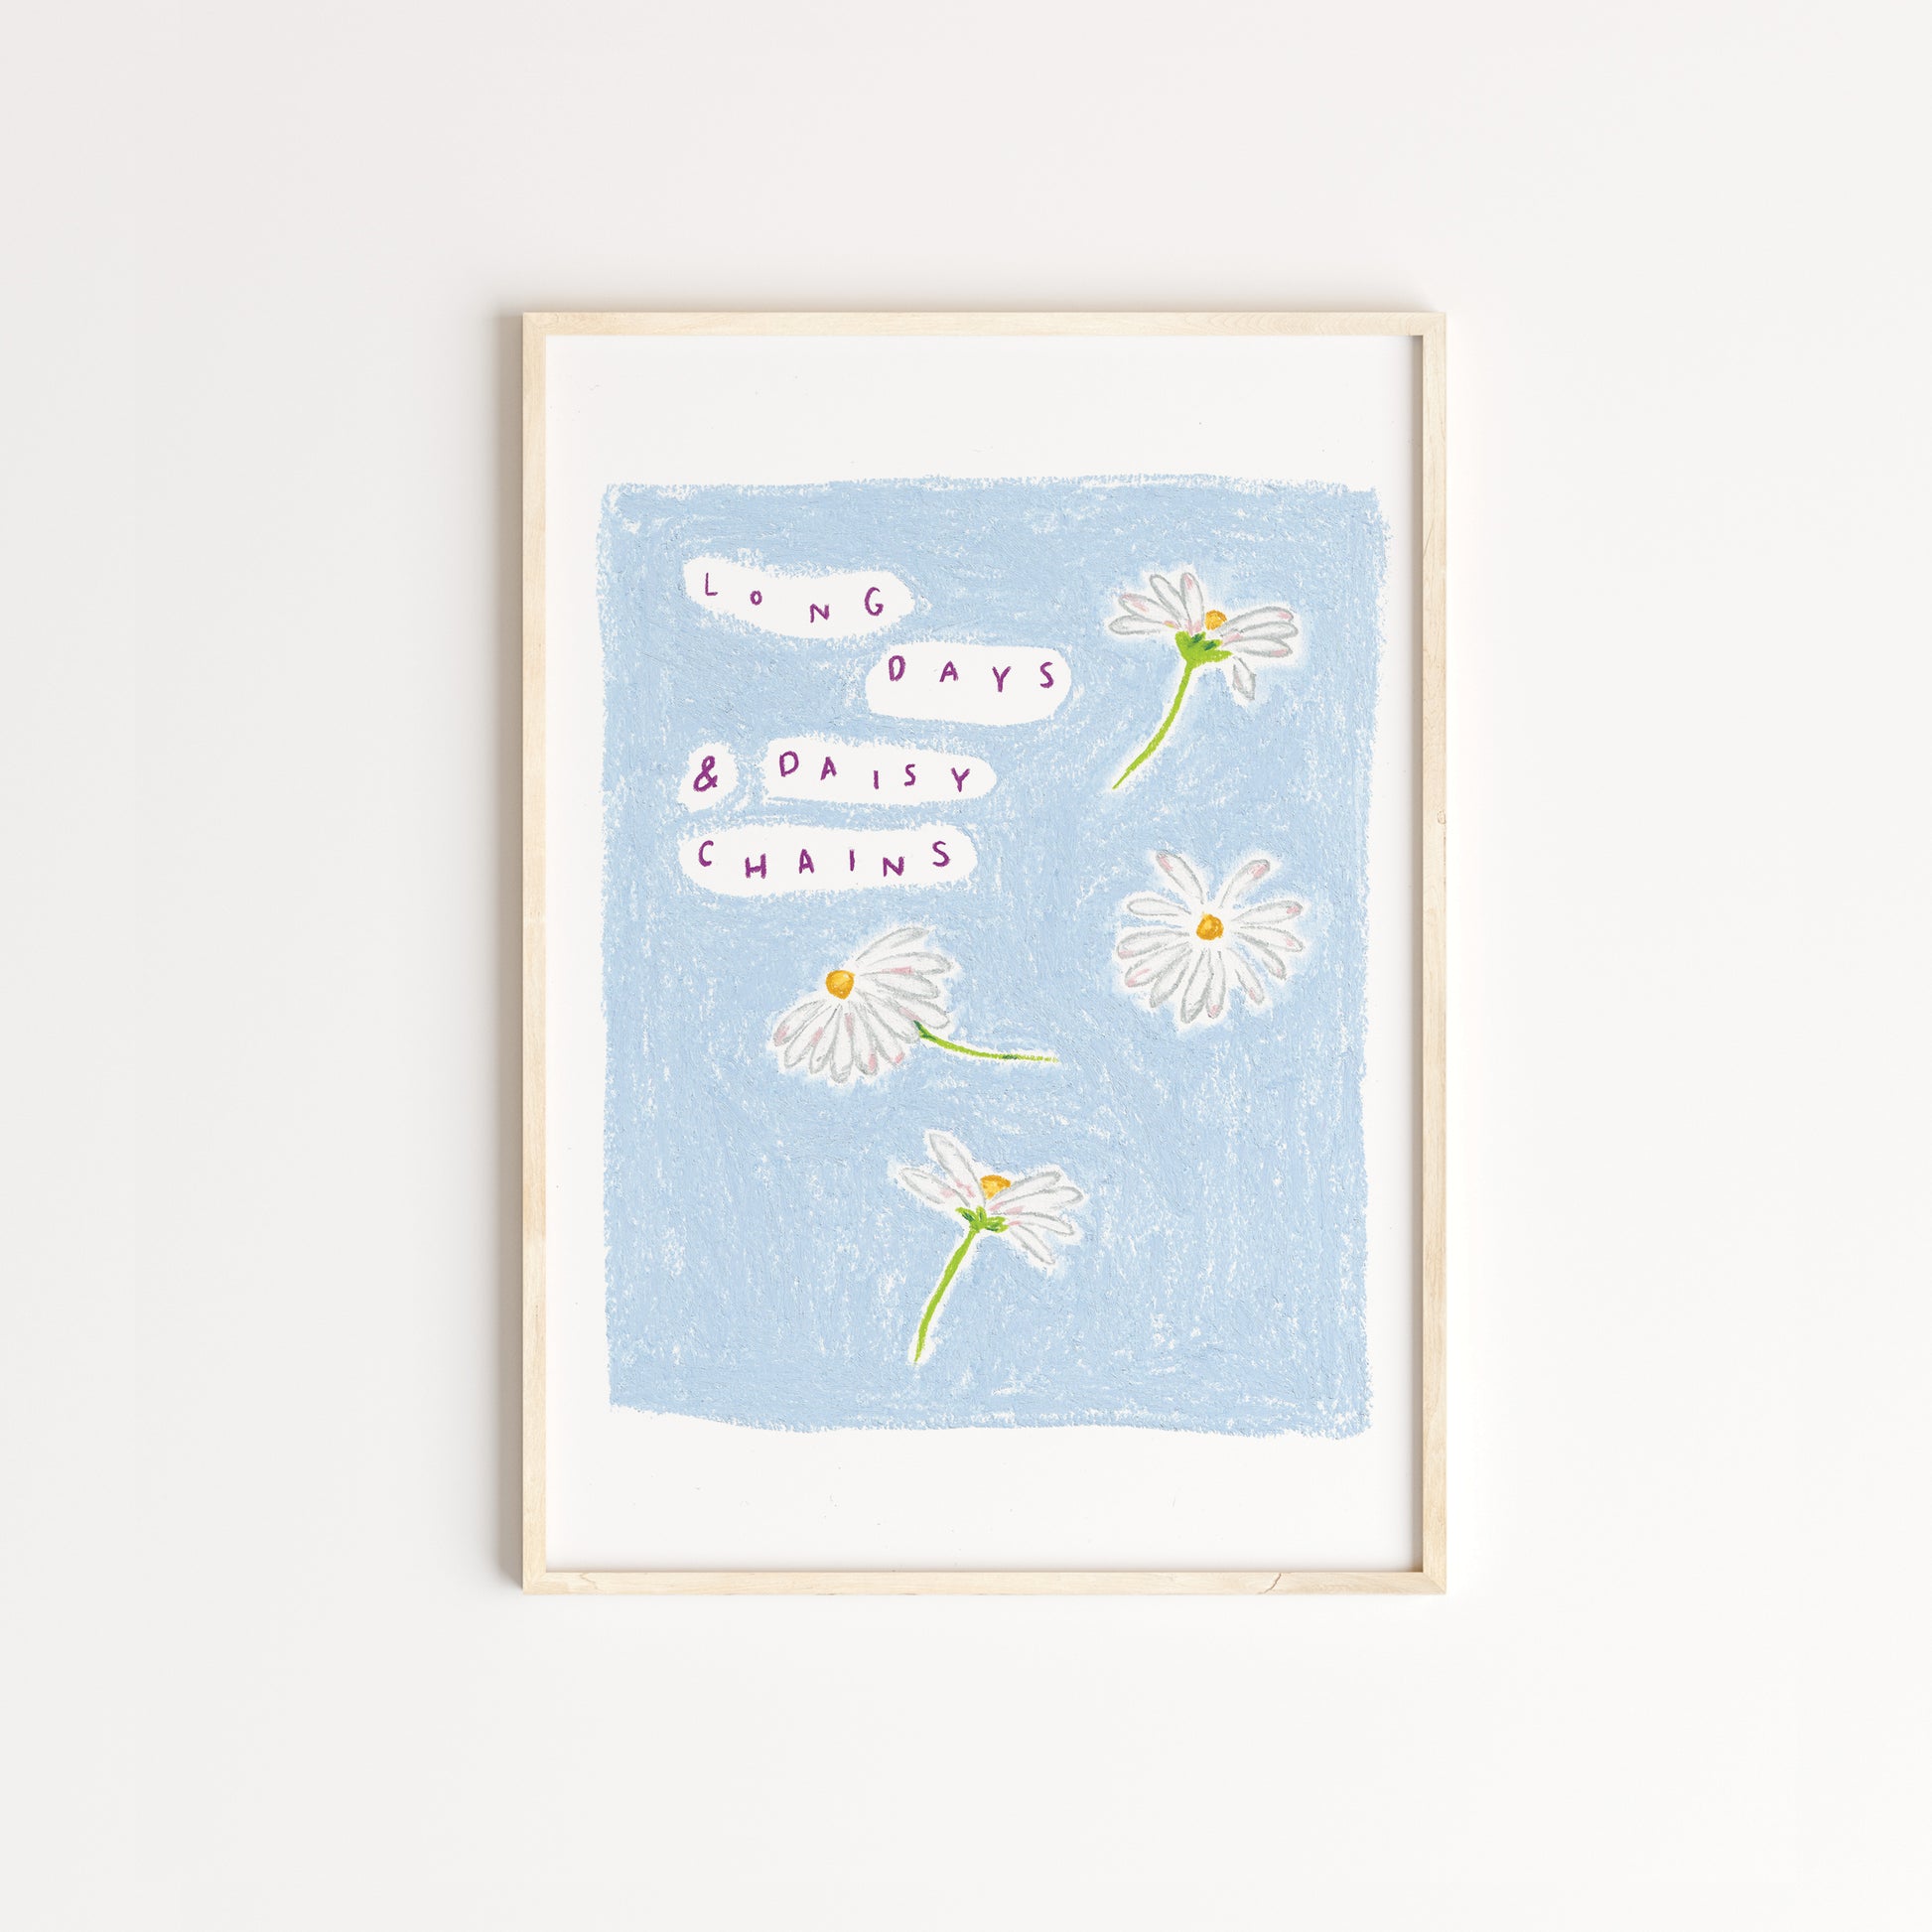 Hand-drawn print of white daises with dashes on pink in the details, the words 'long days and daisy chains' written on the left hand side, surrounded by a light blue background. Drawn with pastel pencils. Displayed in an oak frame.